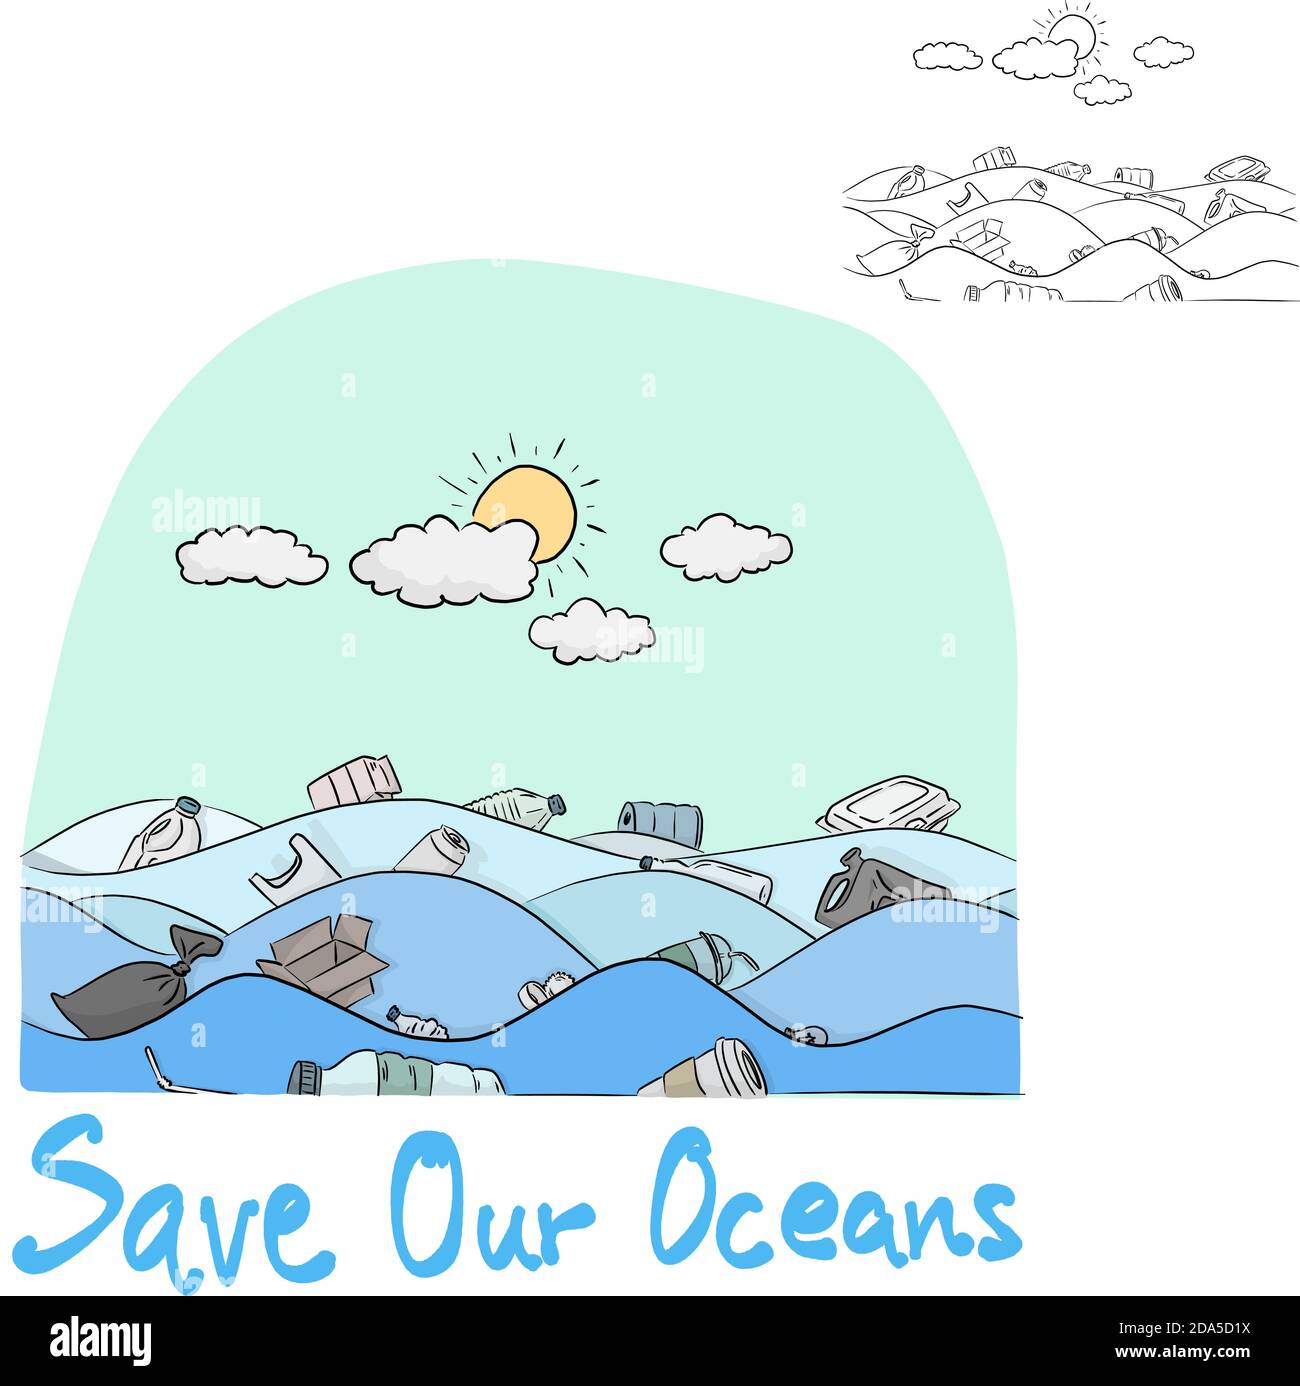 Water Pollution Drawing Images  Free Download on Freepik